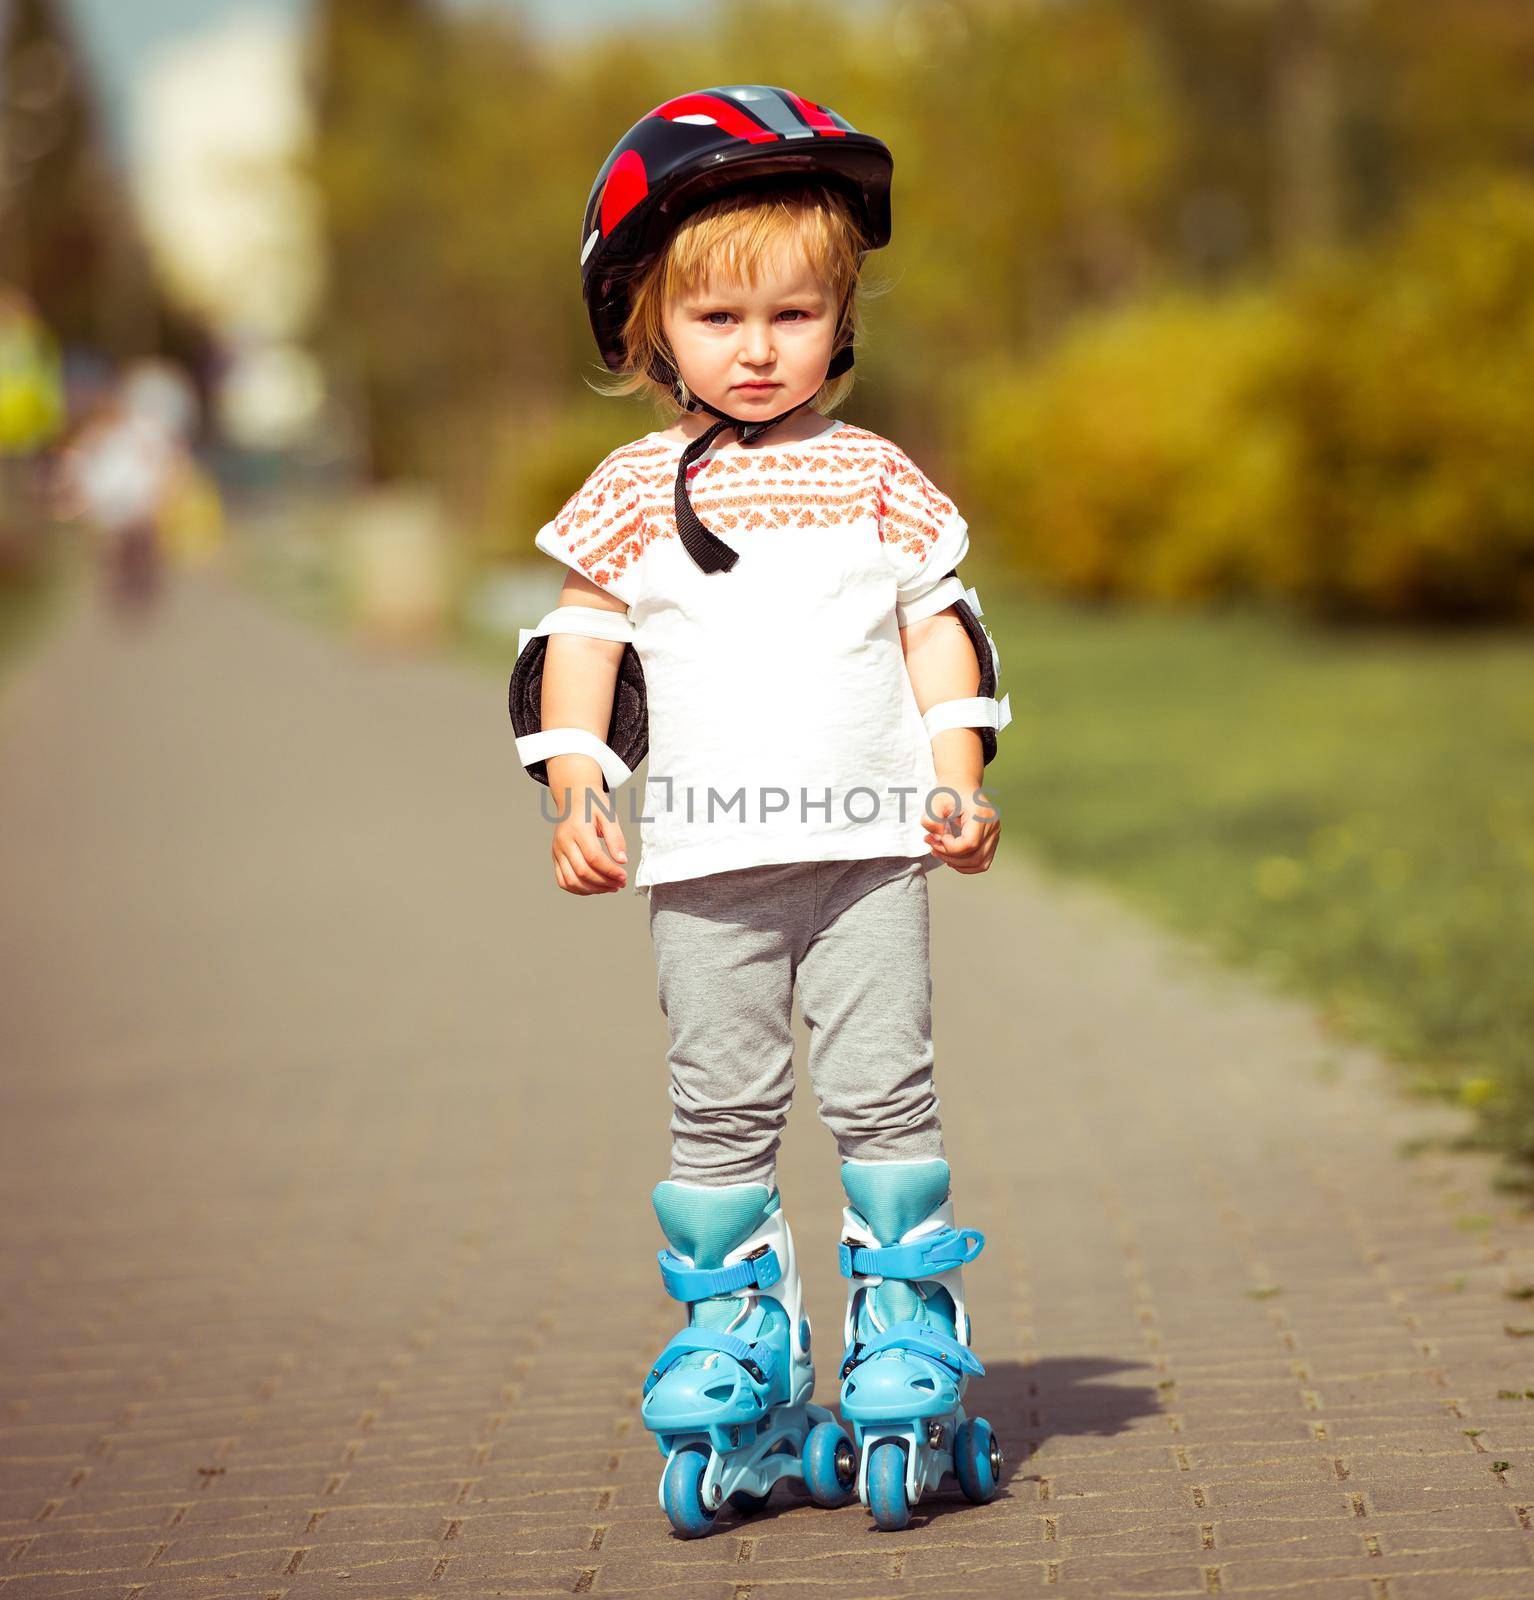 two year old pretty girl in roller skates and a helmet on the street